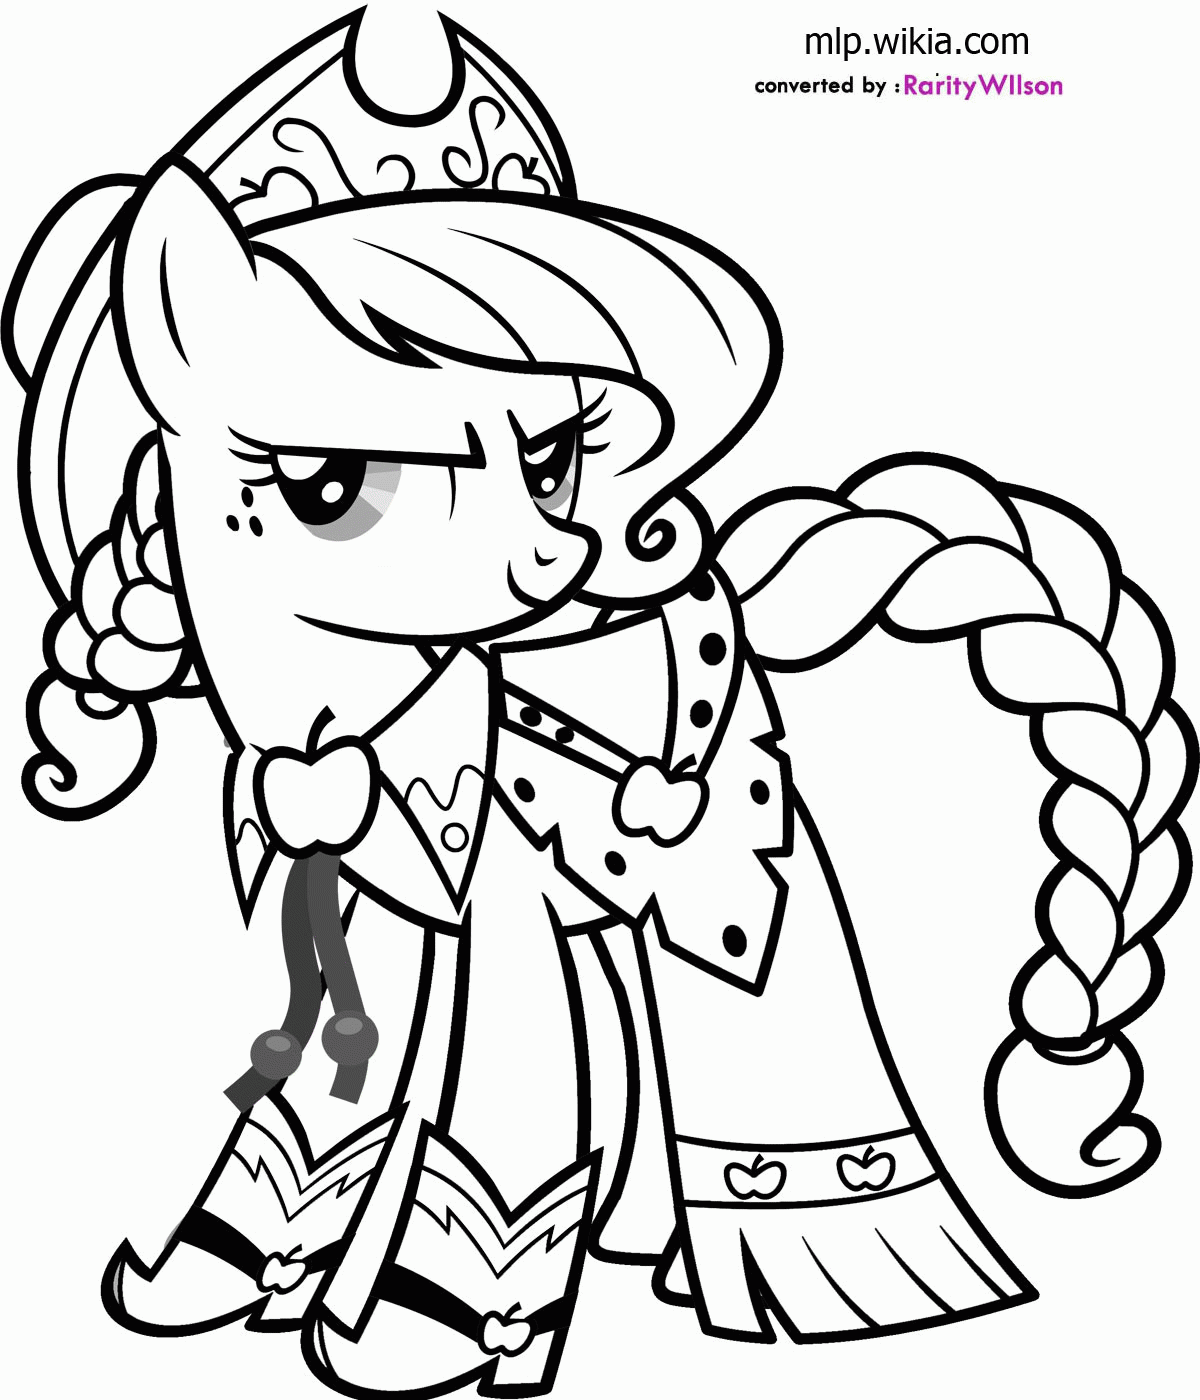 Free My Little Pony Coloring Pages Image 22 - VoteForVerde.com